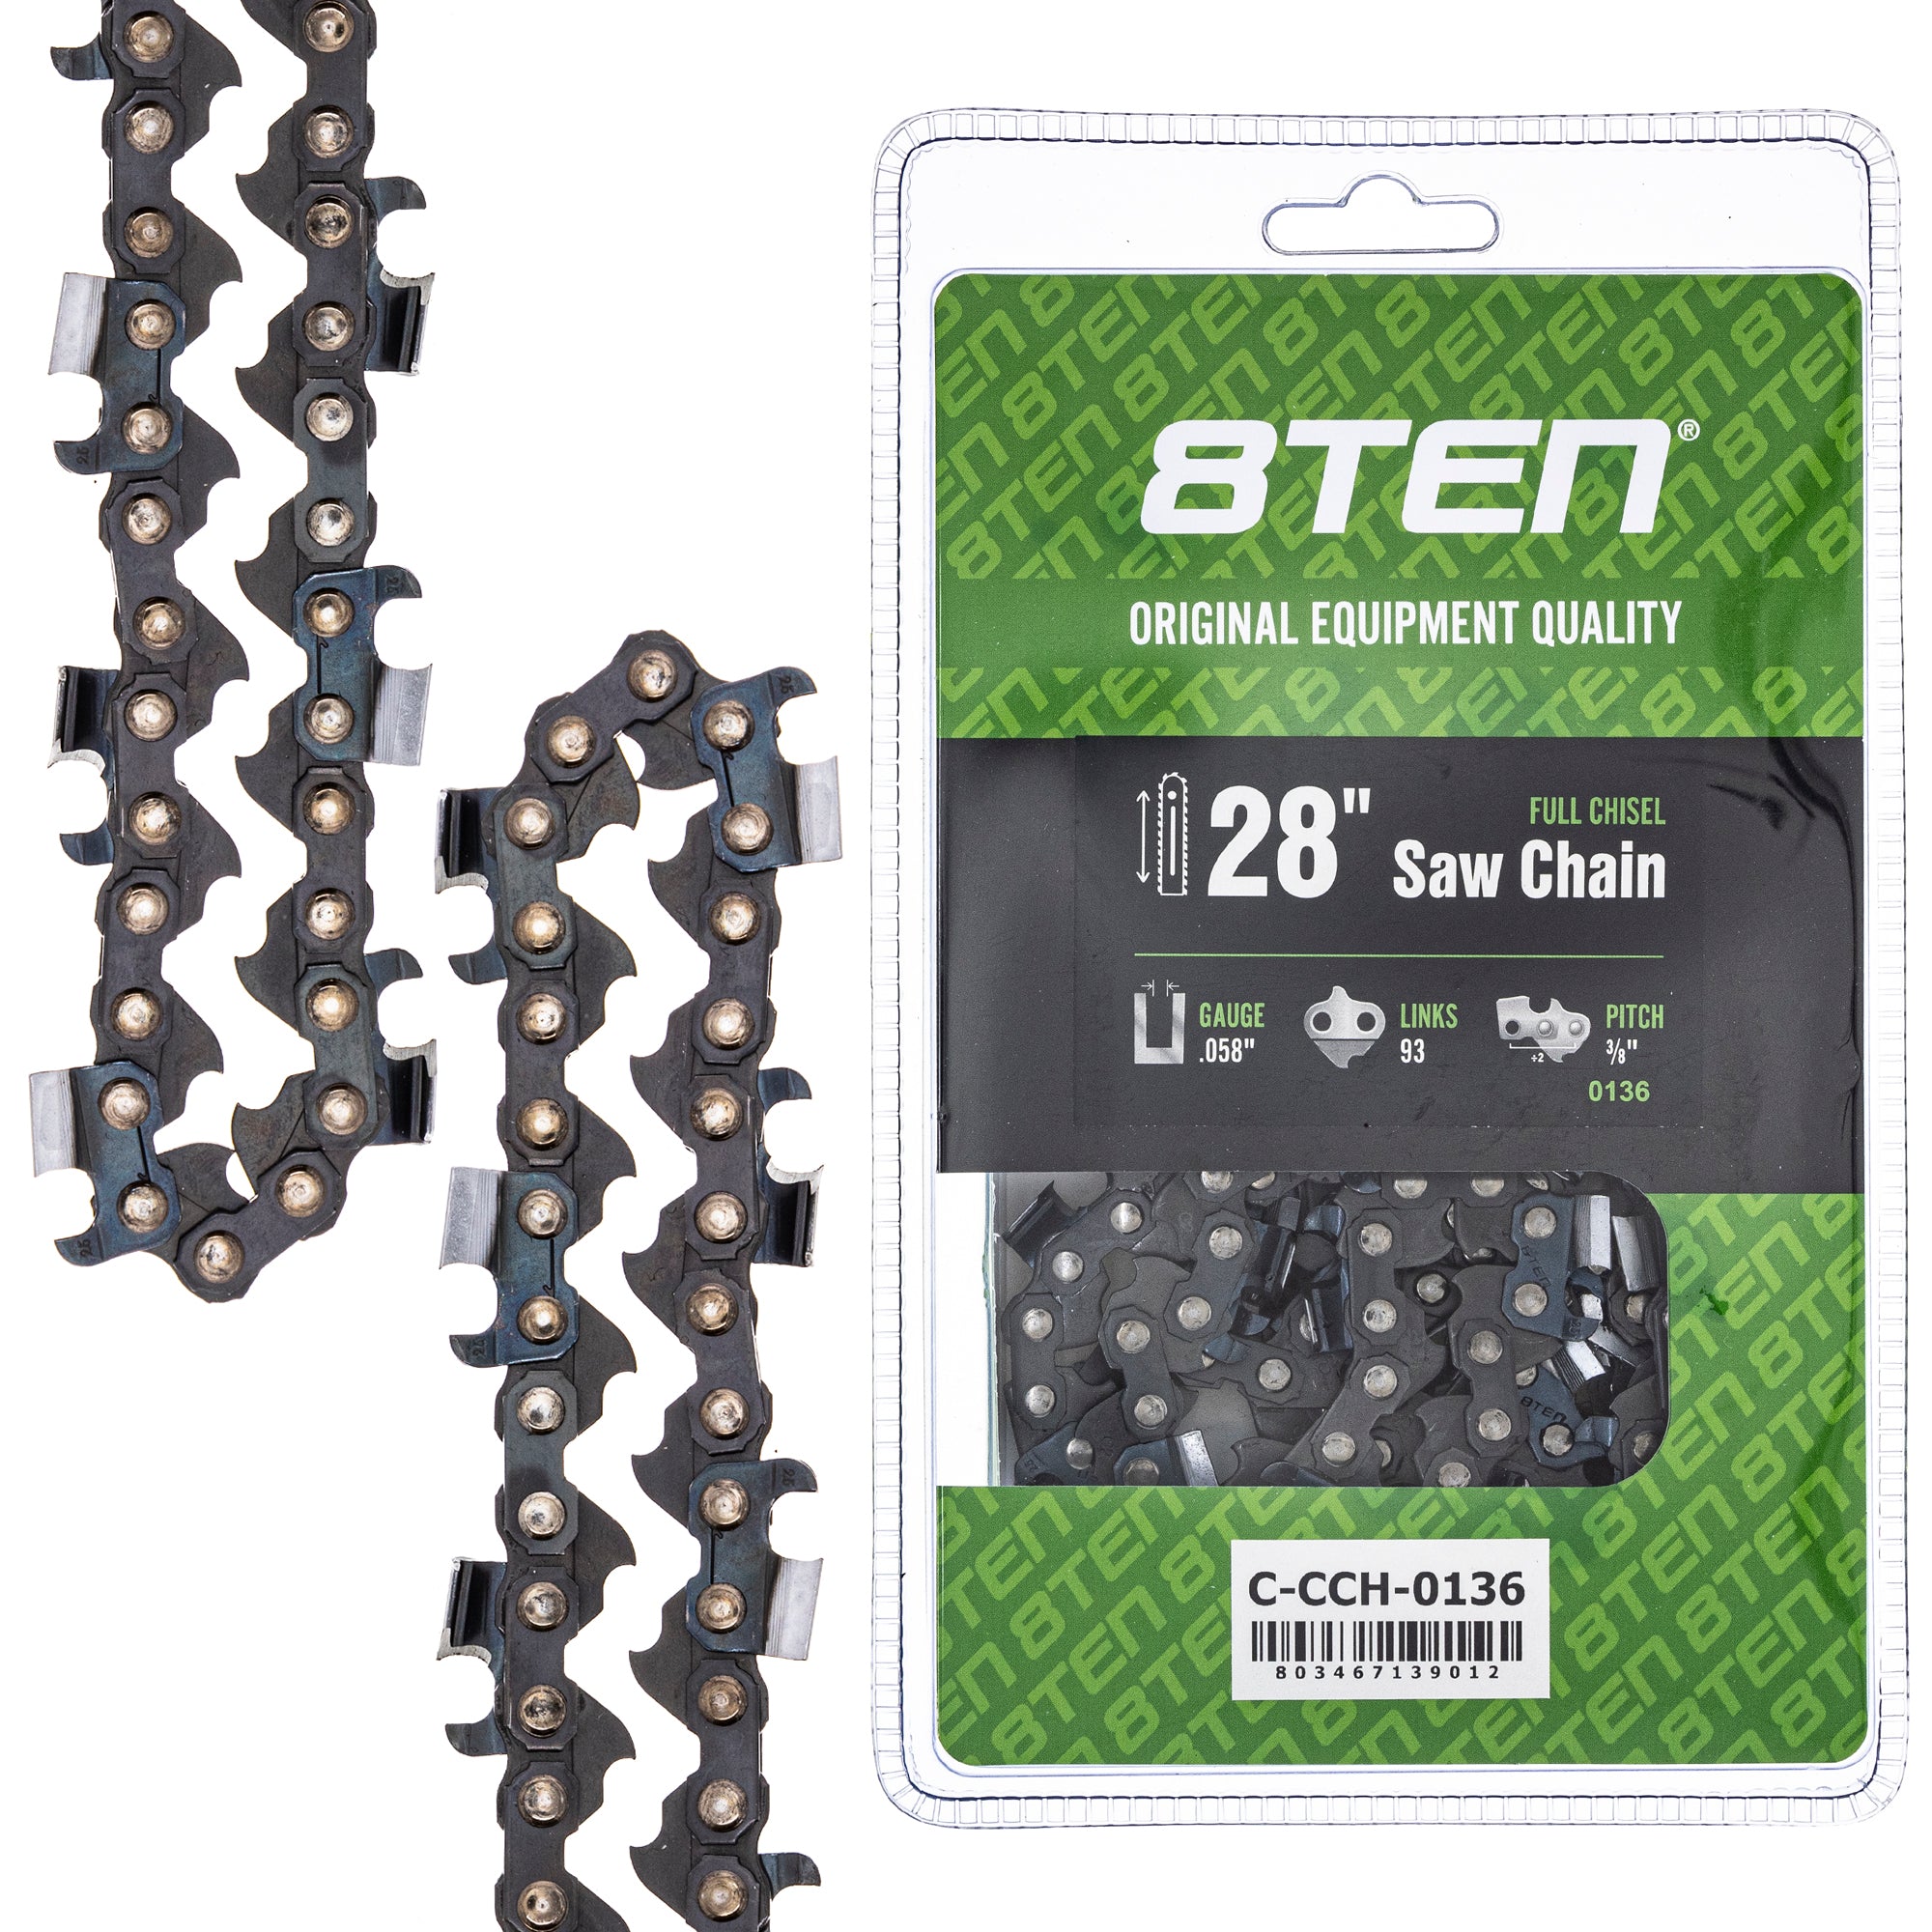 Chainsaw Chain 28 Inch .0583/8 93DL for zOTHER Oregon MT DCS9010FL DCS9000 DCS7901 8TEN 810-CCC2358H